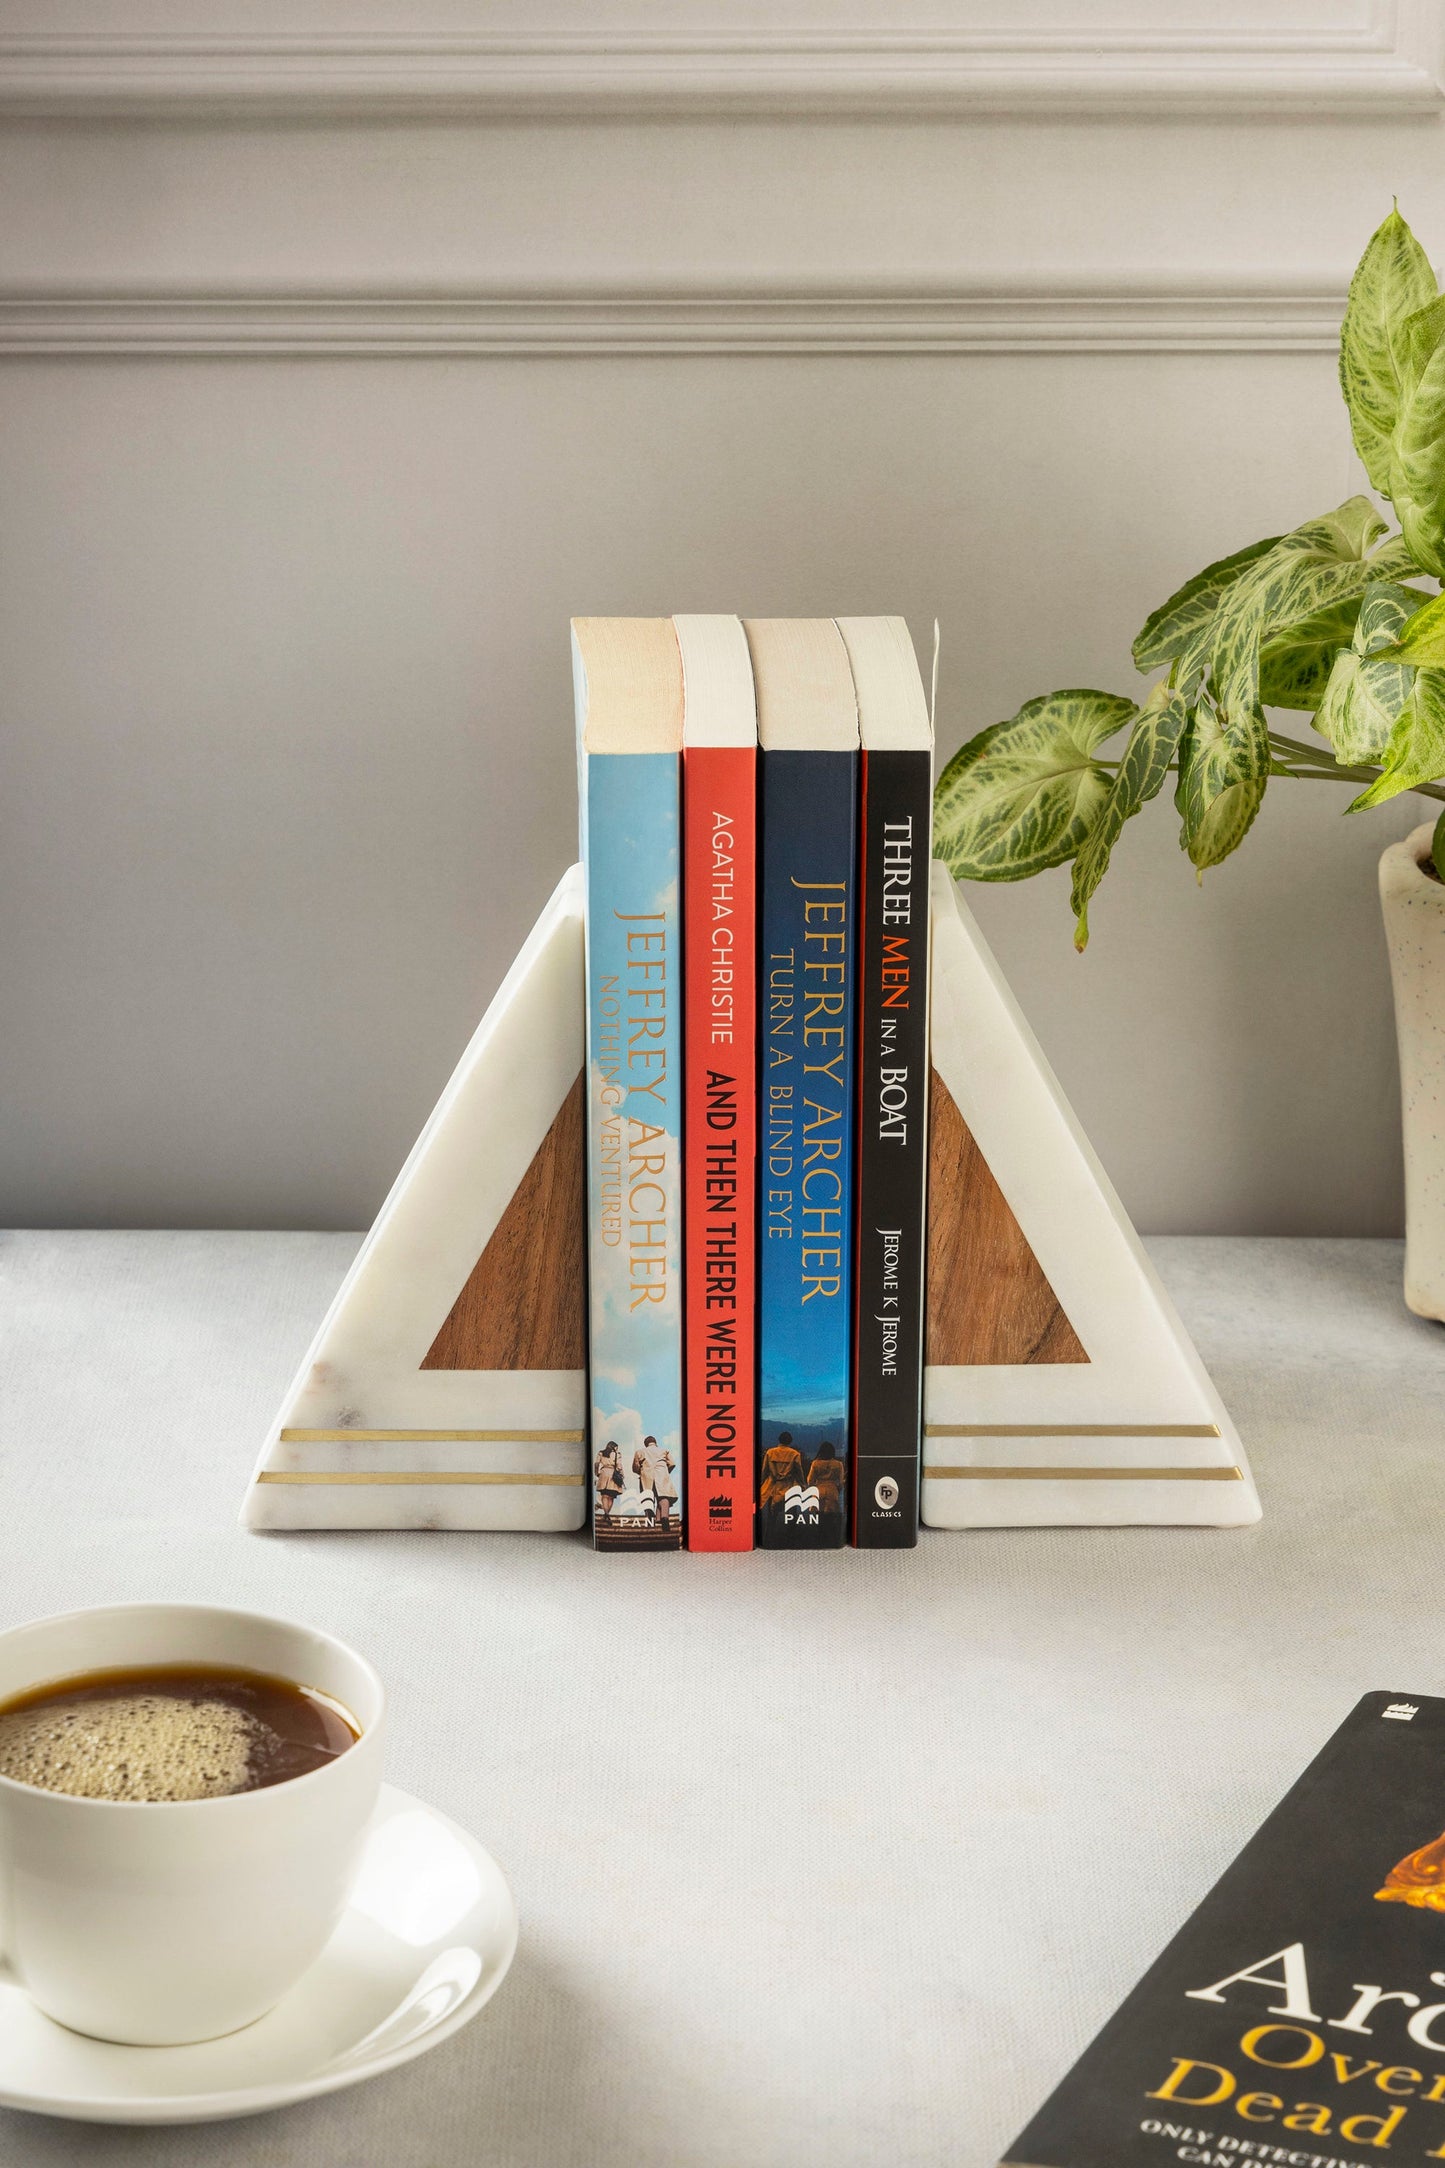 Gilmore Marble Bookends, Set of 2 (6" x 2" )